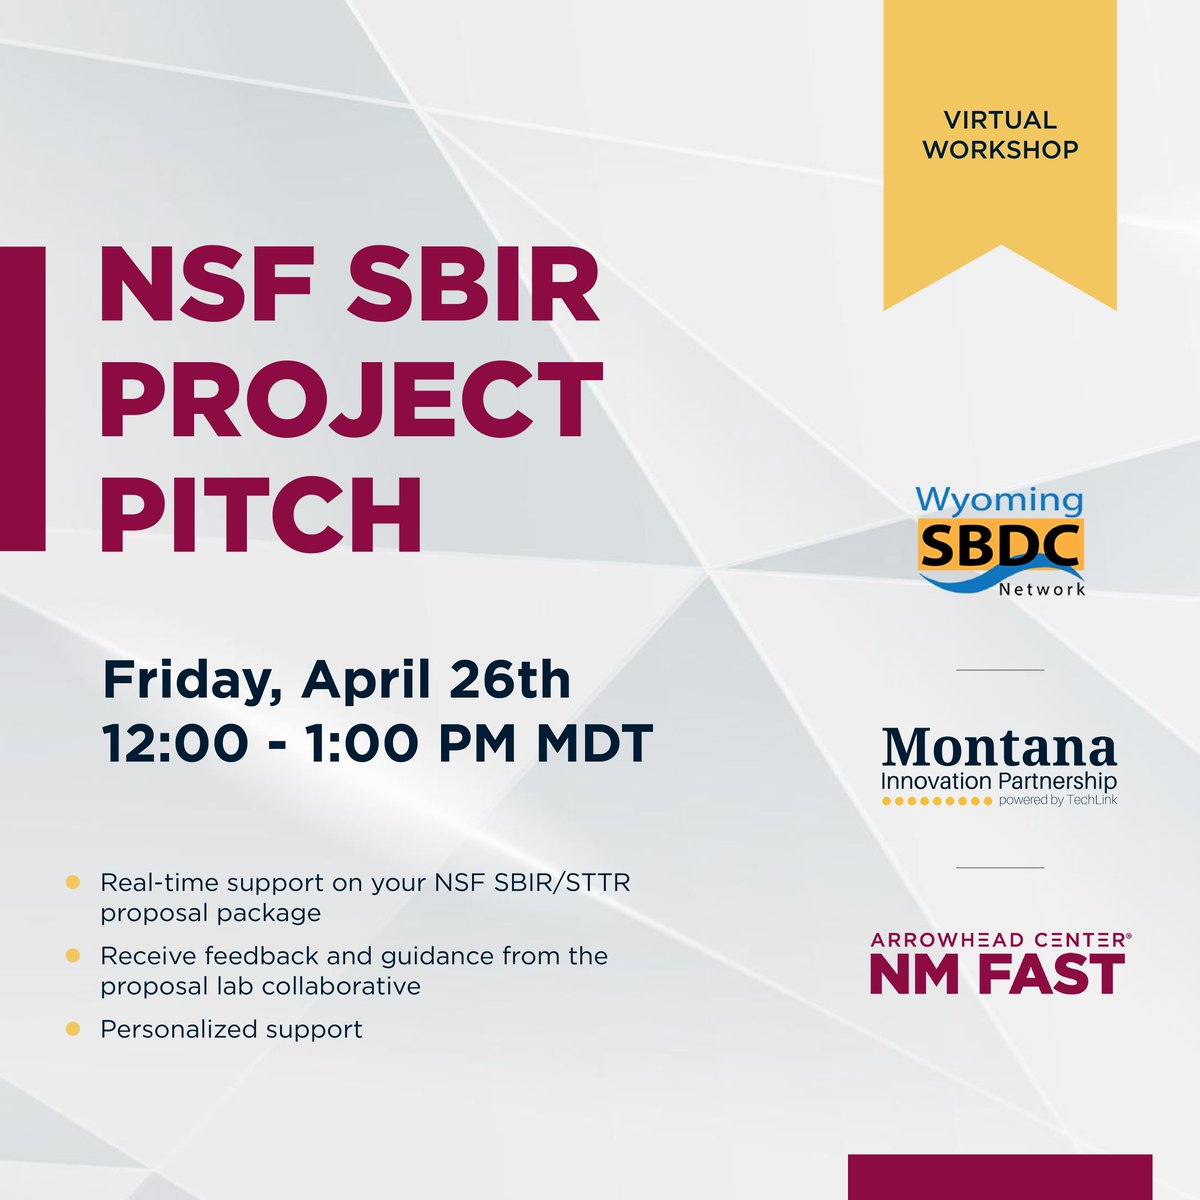 Today's collaborative workshop is your key to success with @NSF #SBIR funding! Join us to discover insider tips on crafting a compelling #NSF SBIR Project Pitch. Register now and secure your spot: buff.ly/3VJU95g